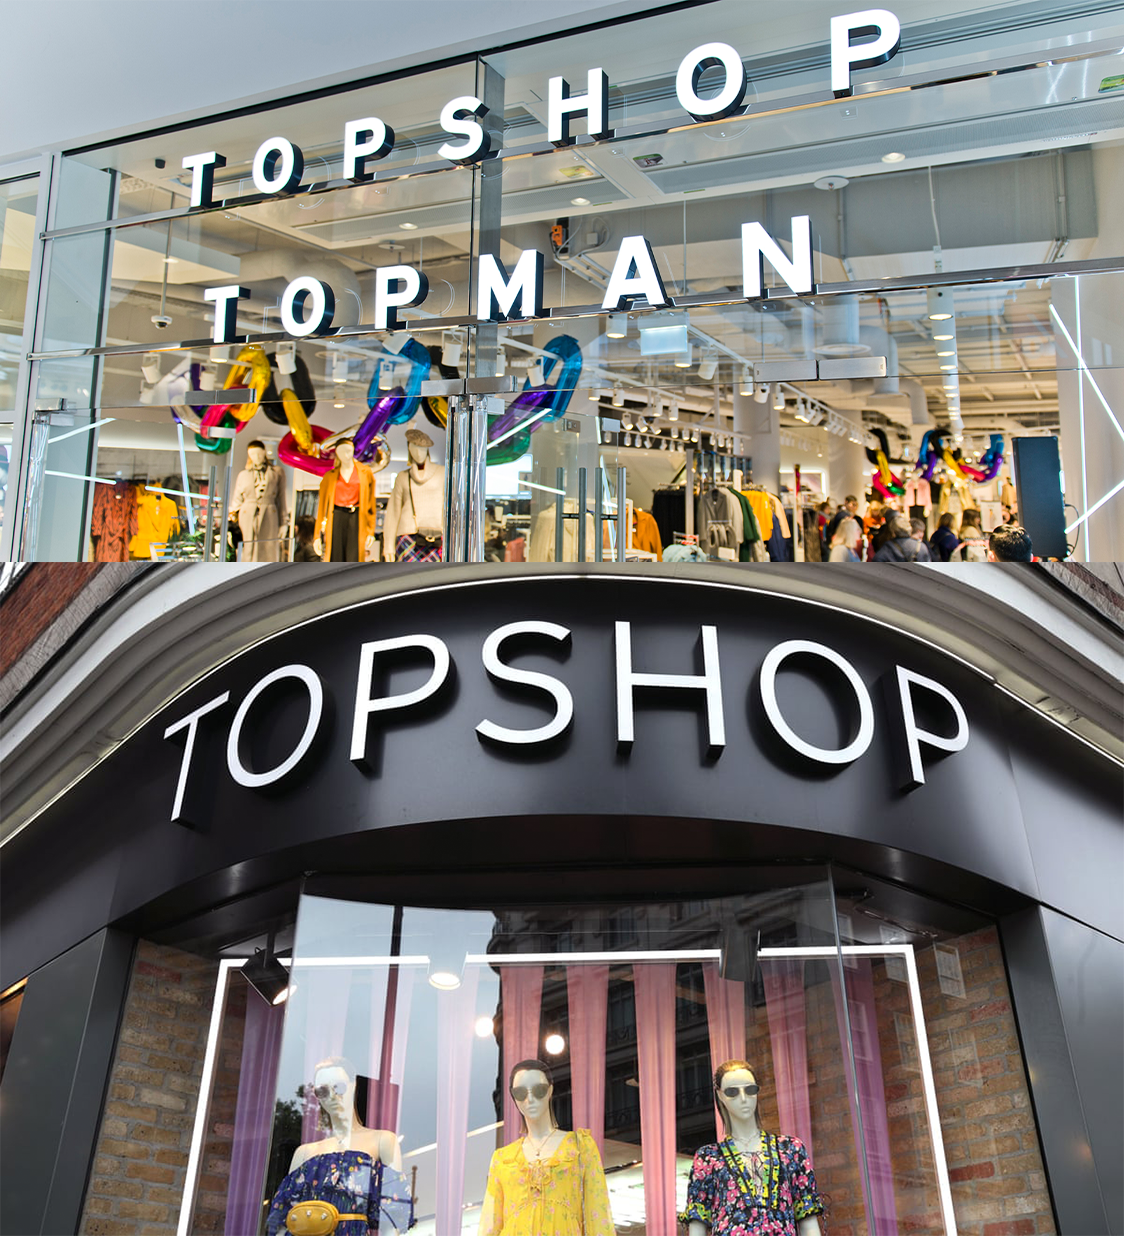 Topshop: does their brand really cater for both men and women? 